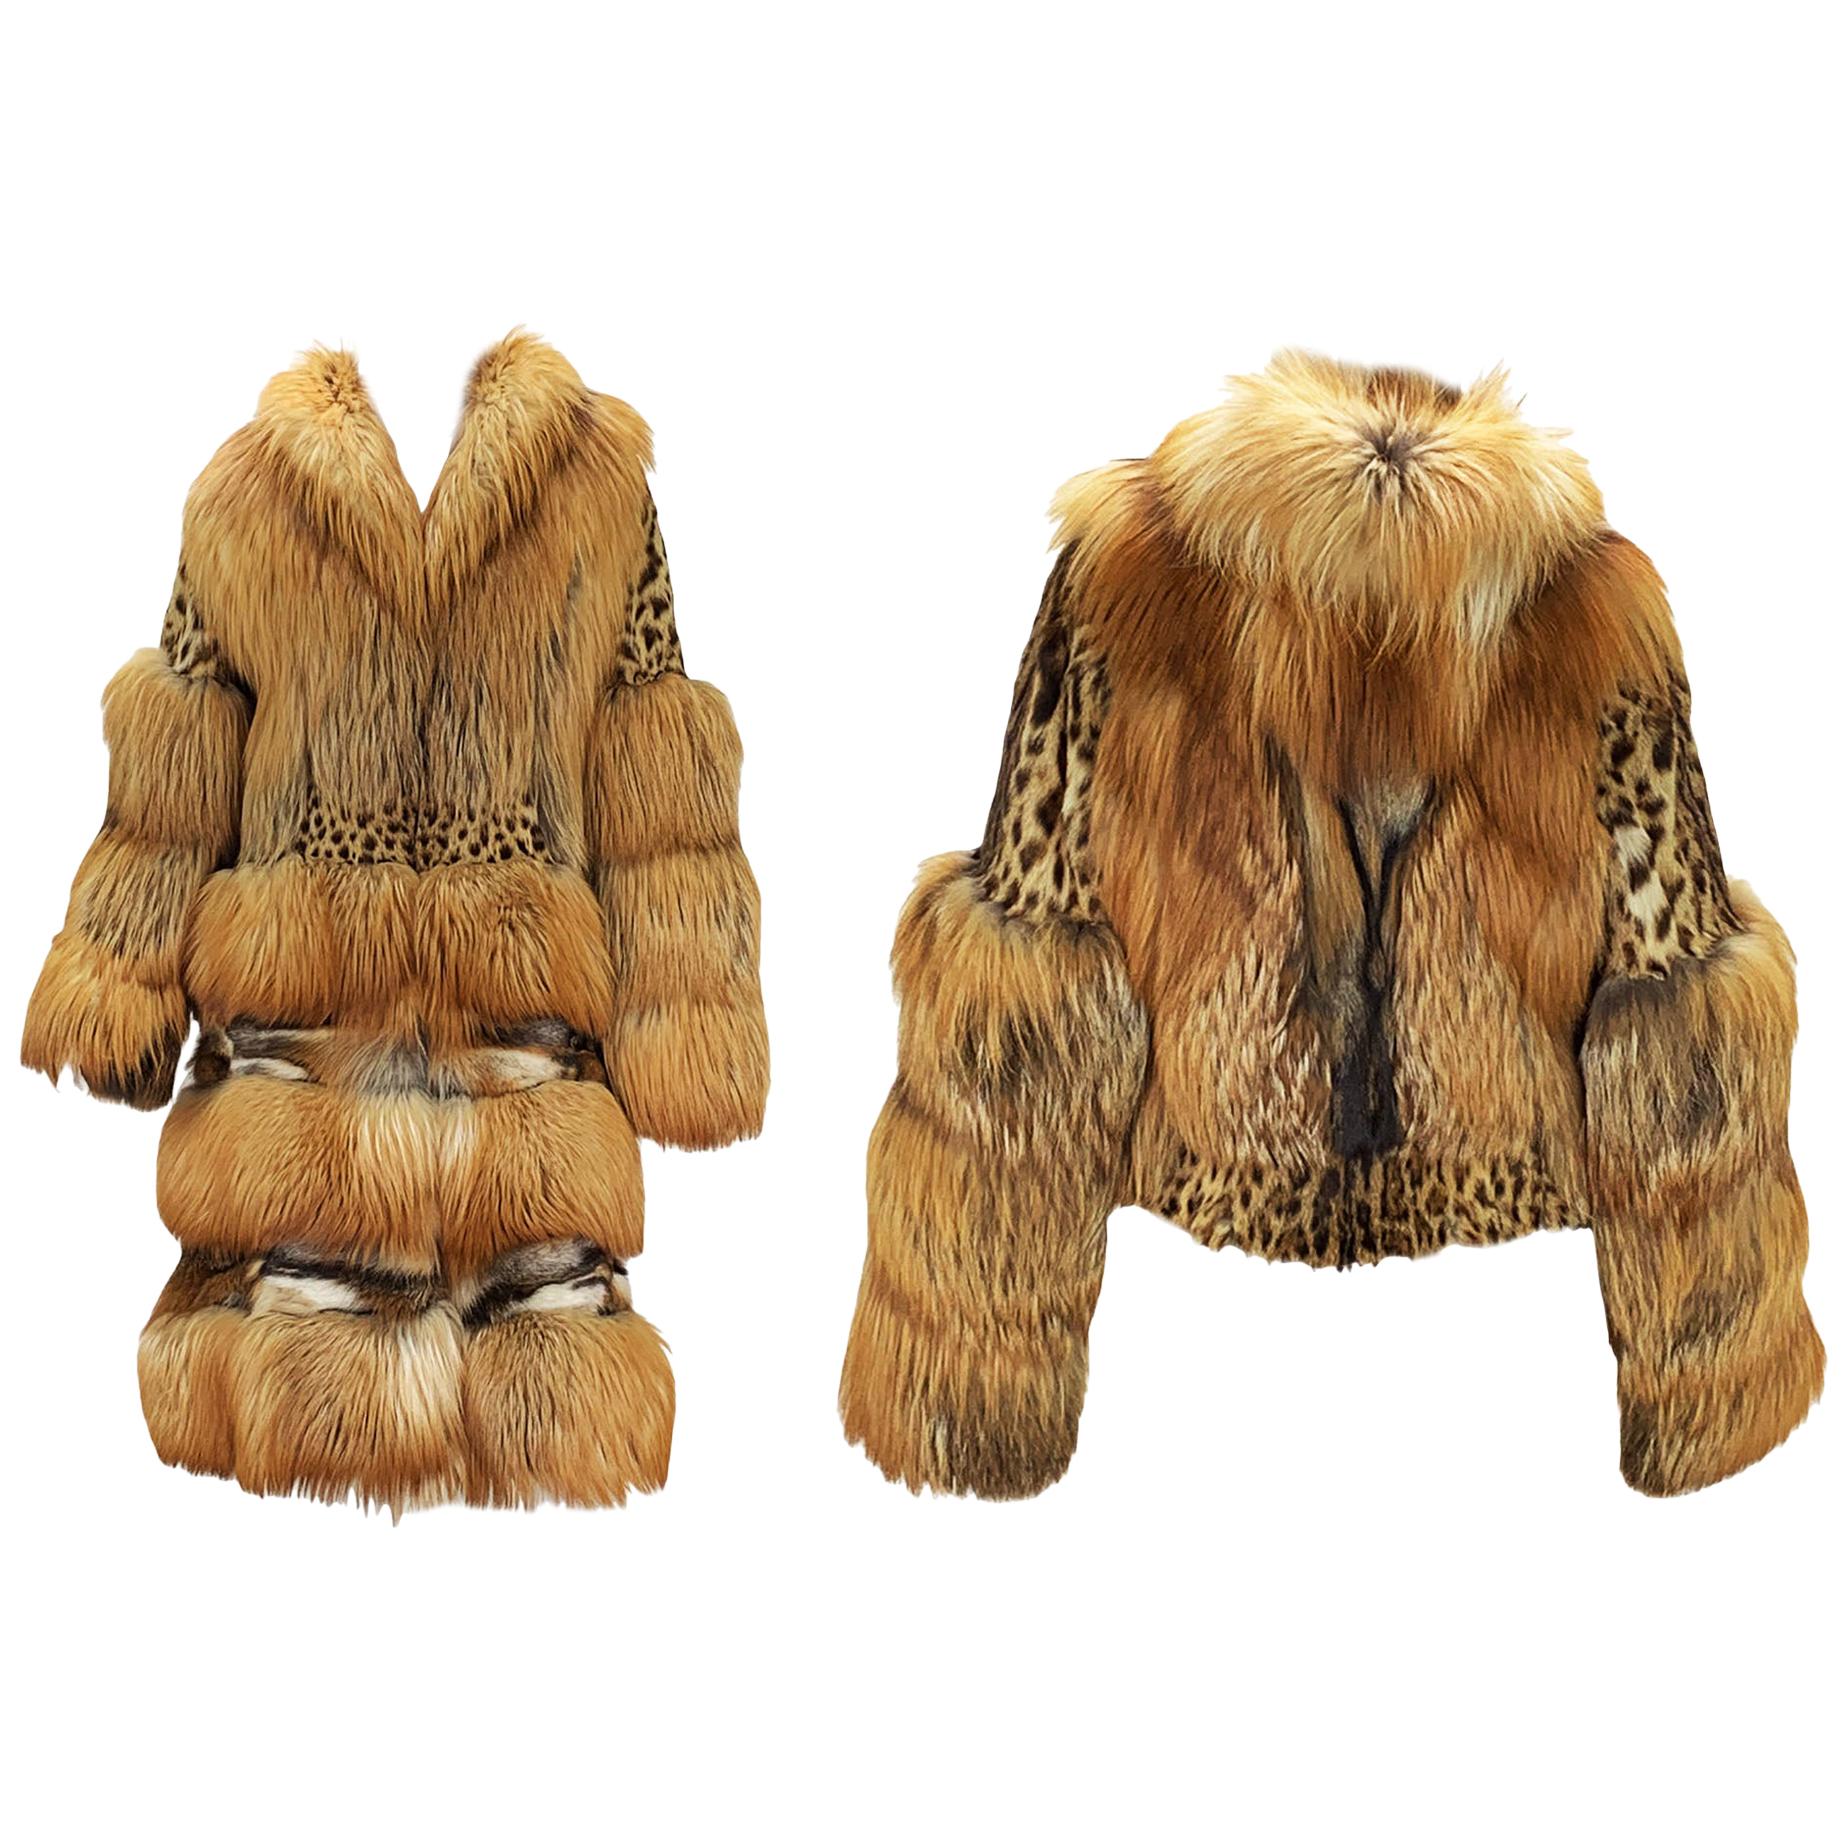 Museum Tom Ford for Gucci Runway F/W 1999 2 in 1 Fur Coat Jacket 